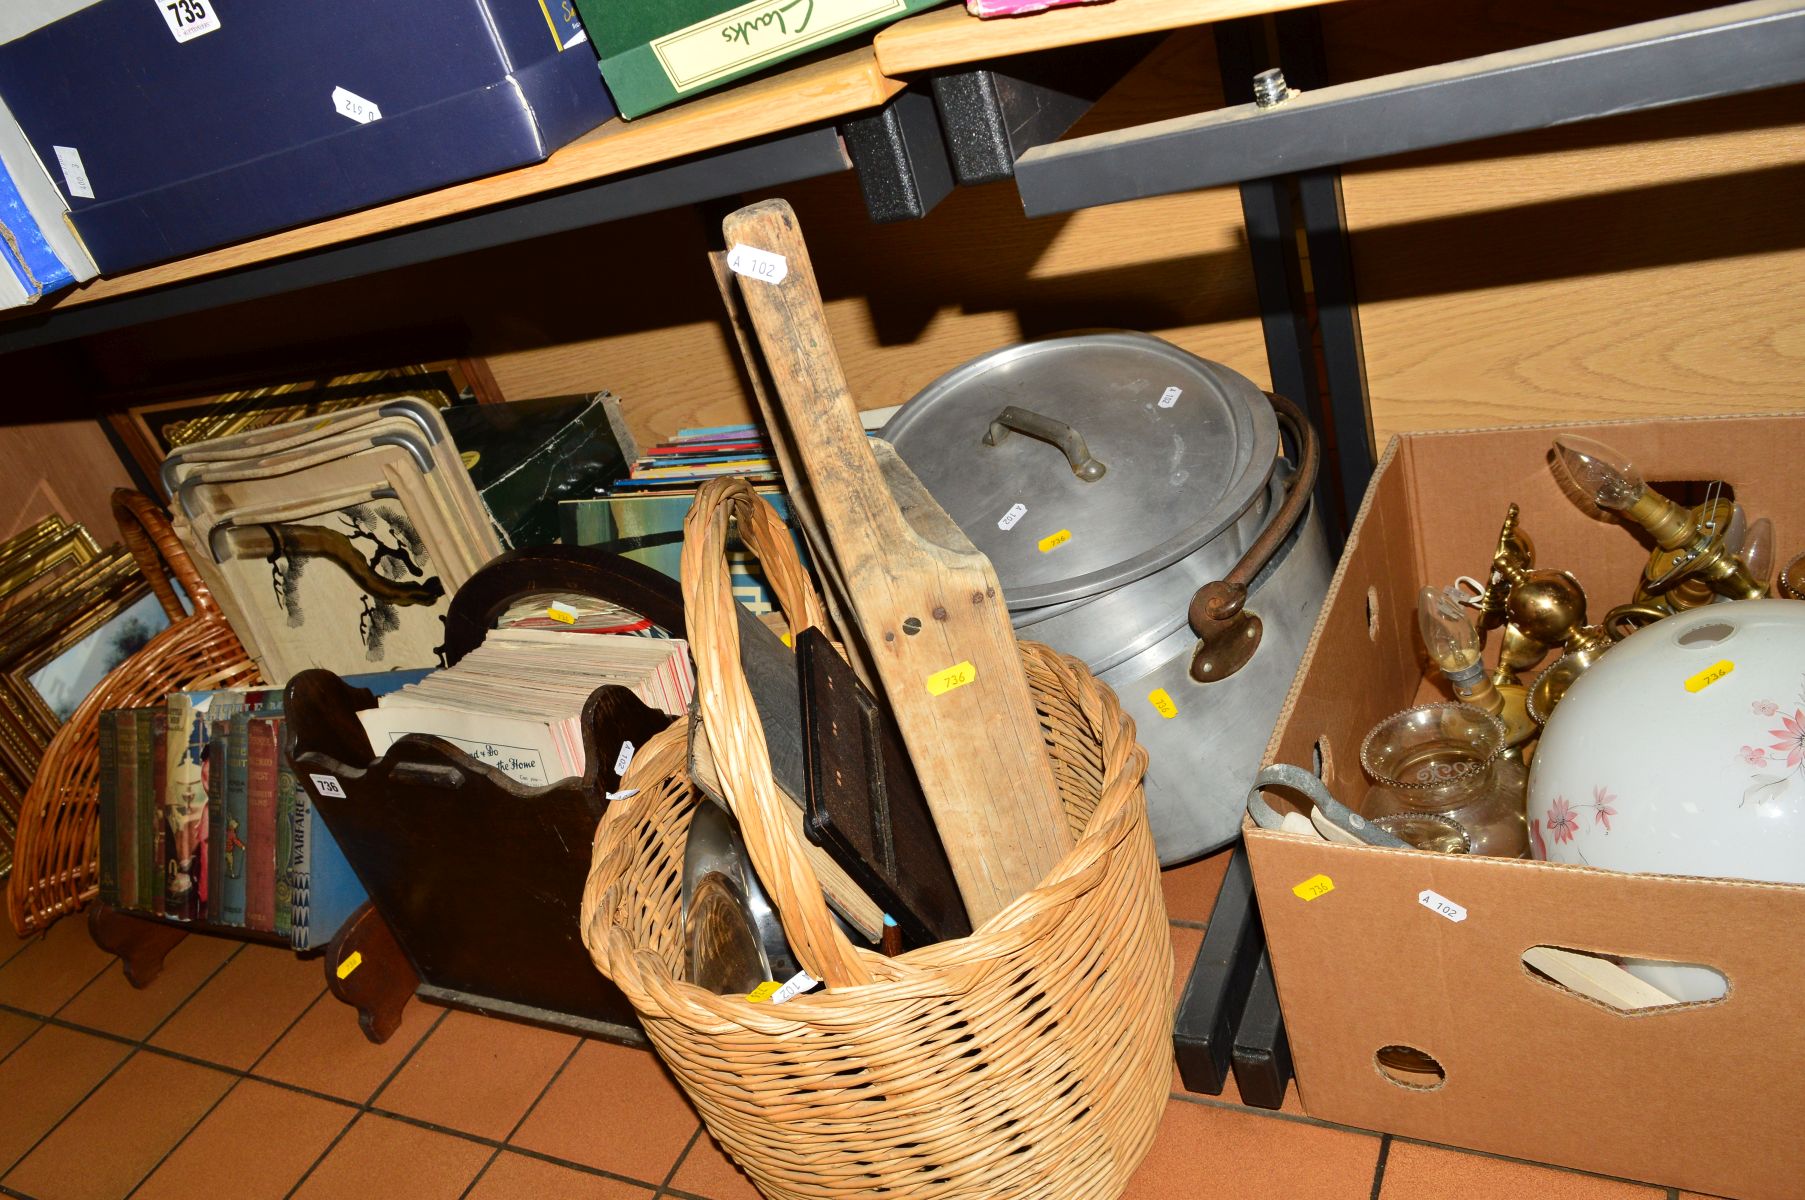 A QUANTITY OF SUNDRY ITEMS, to include wicker baskets, ceiling lights, records, books, pans,